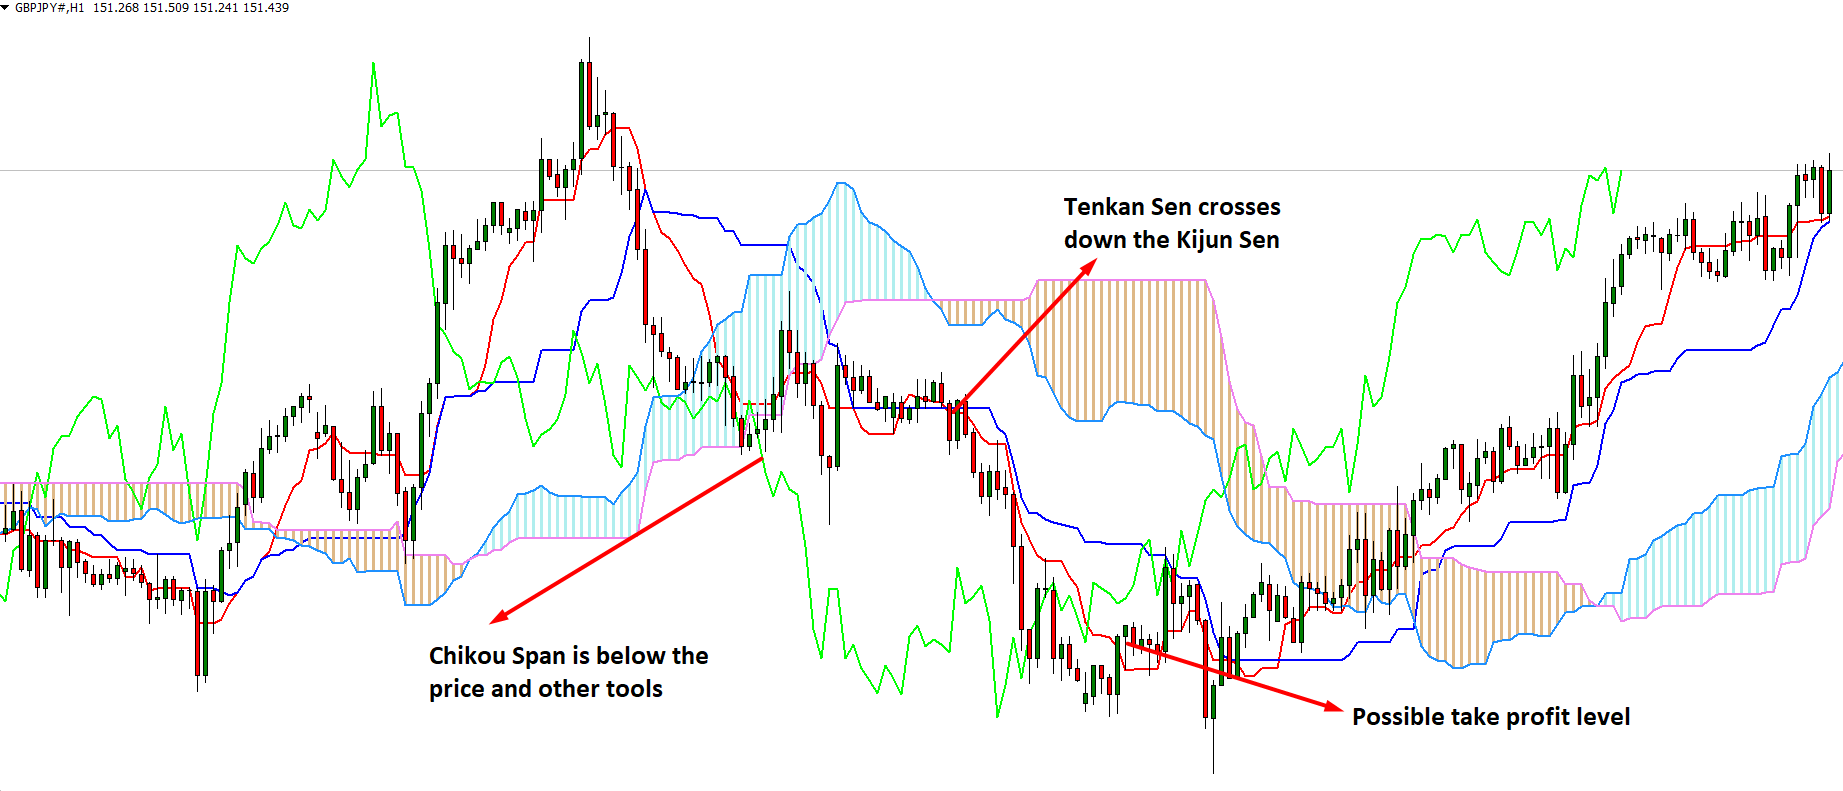 Set the take-profit level at 30 points from the opening price for the first position. 